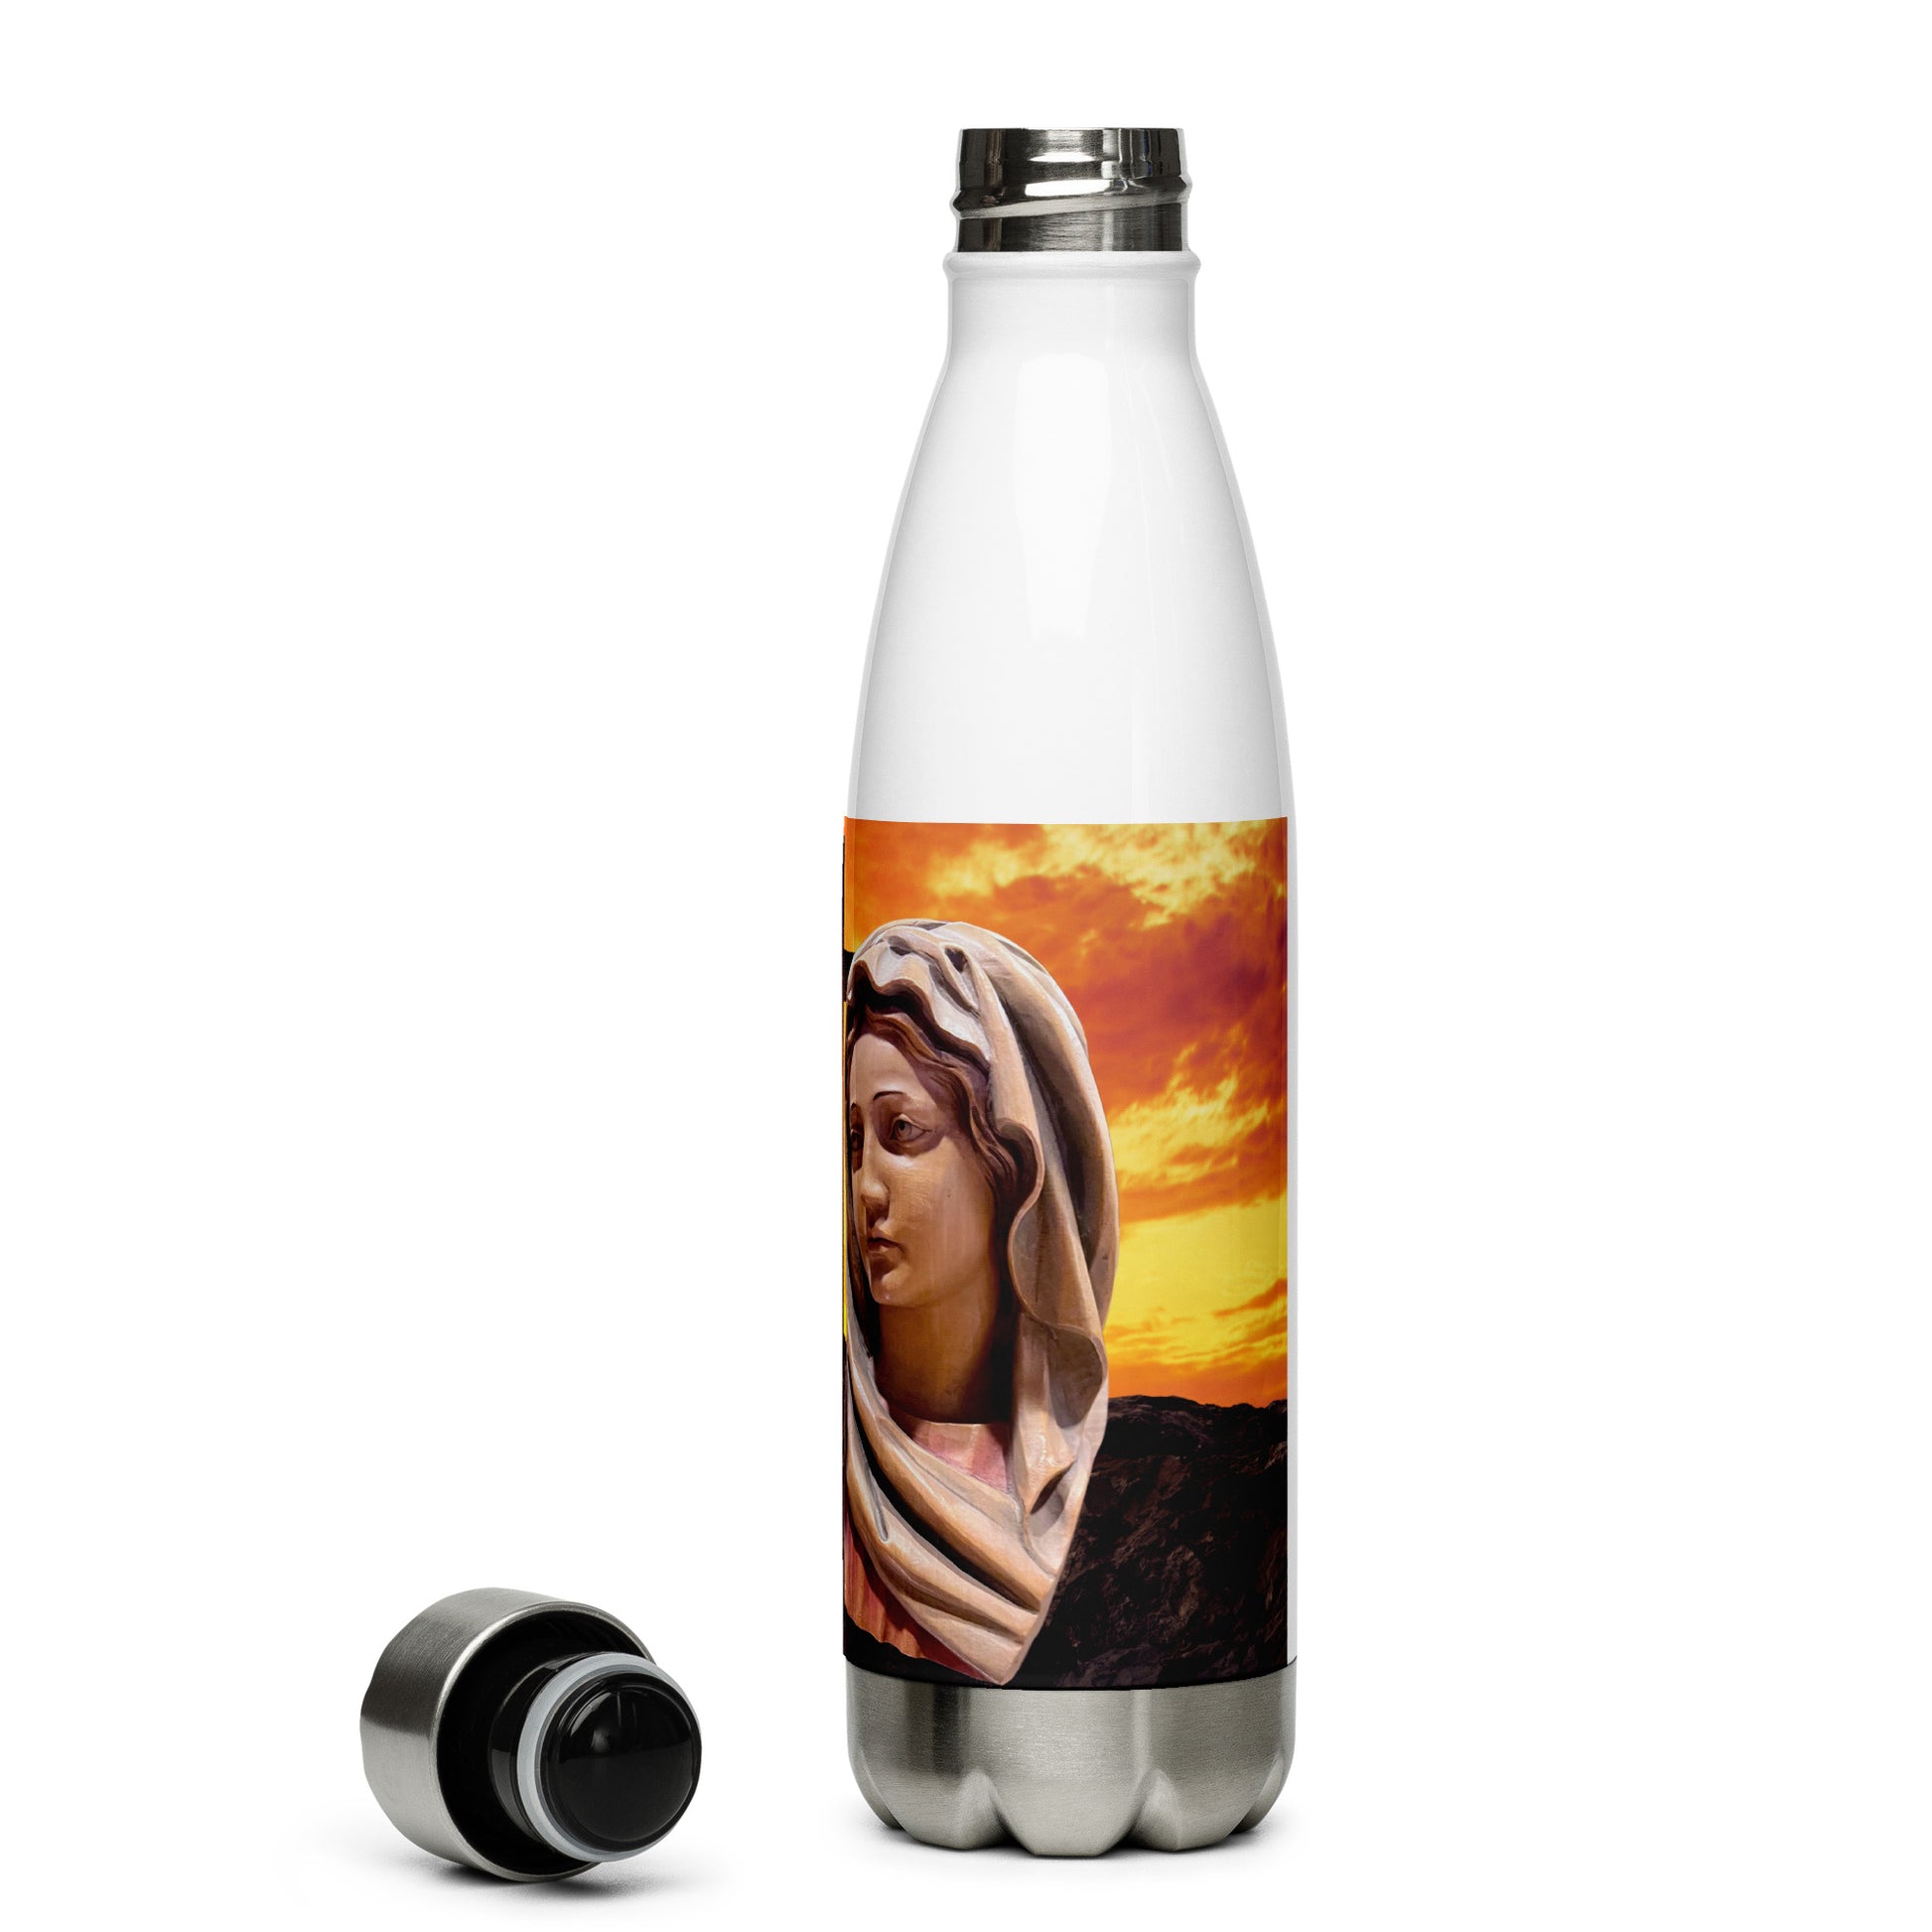 Jesus and Mary Stainless Steel Water Bottle - Bob and Penny Lord